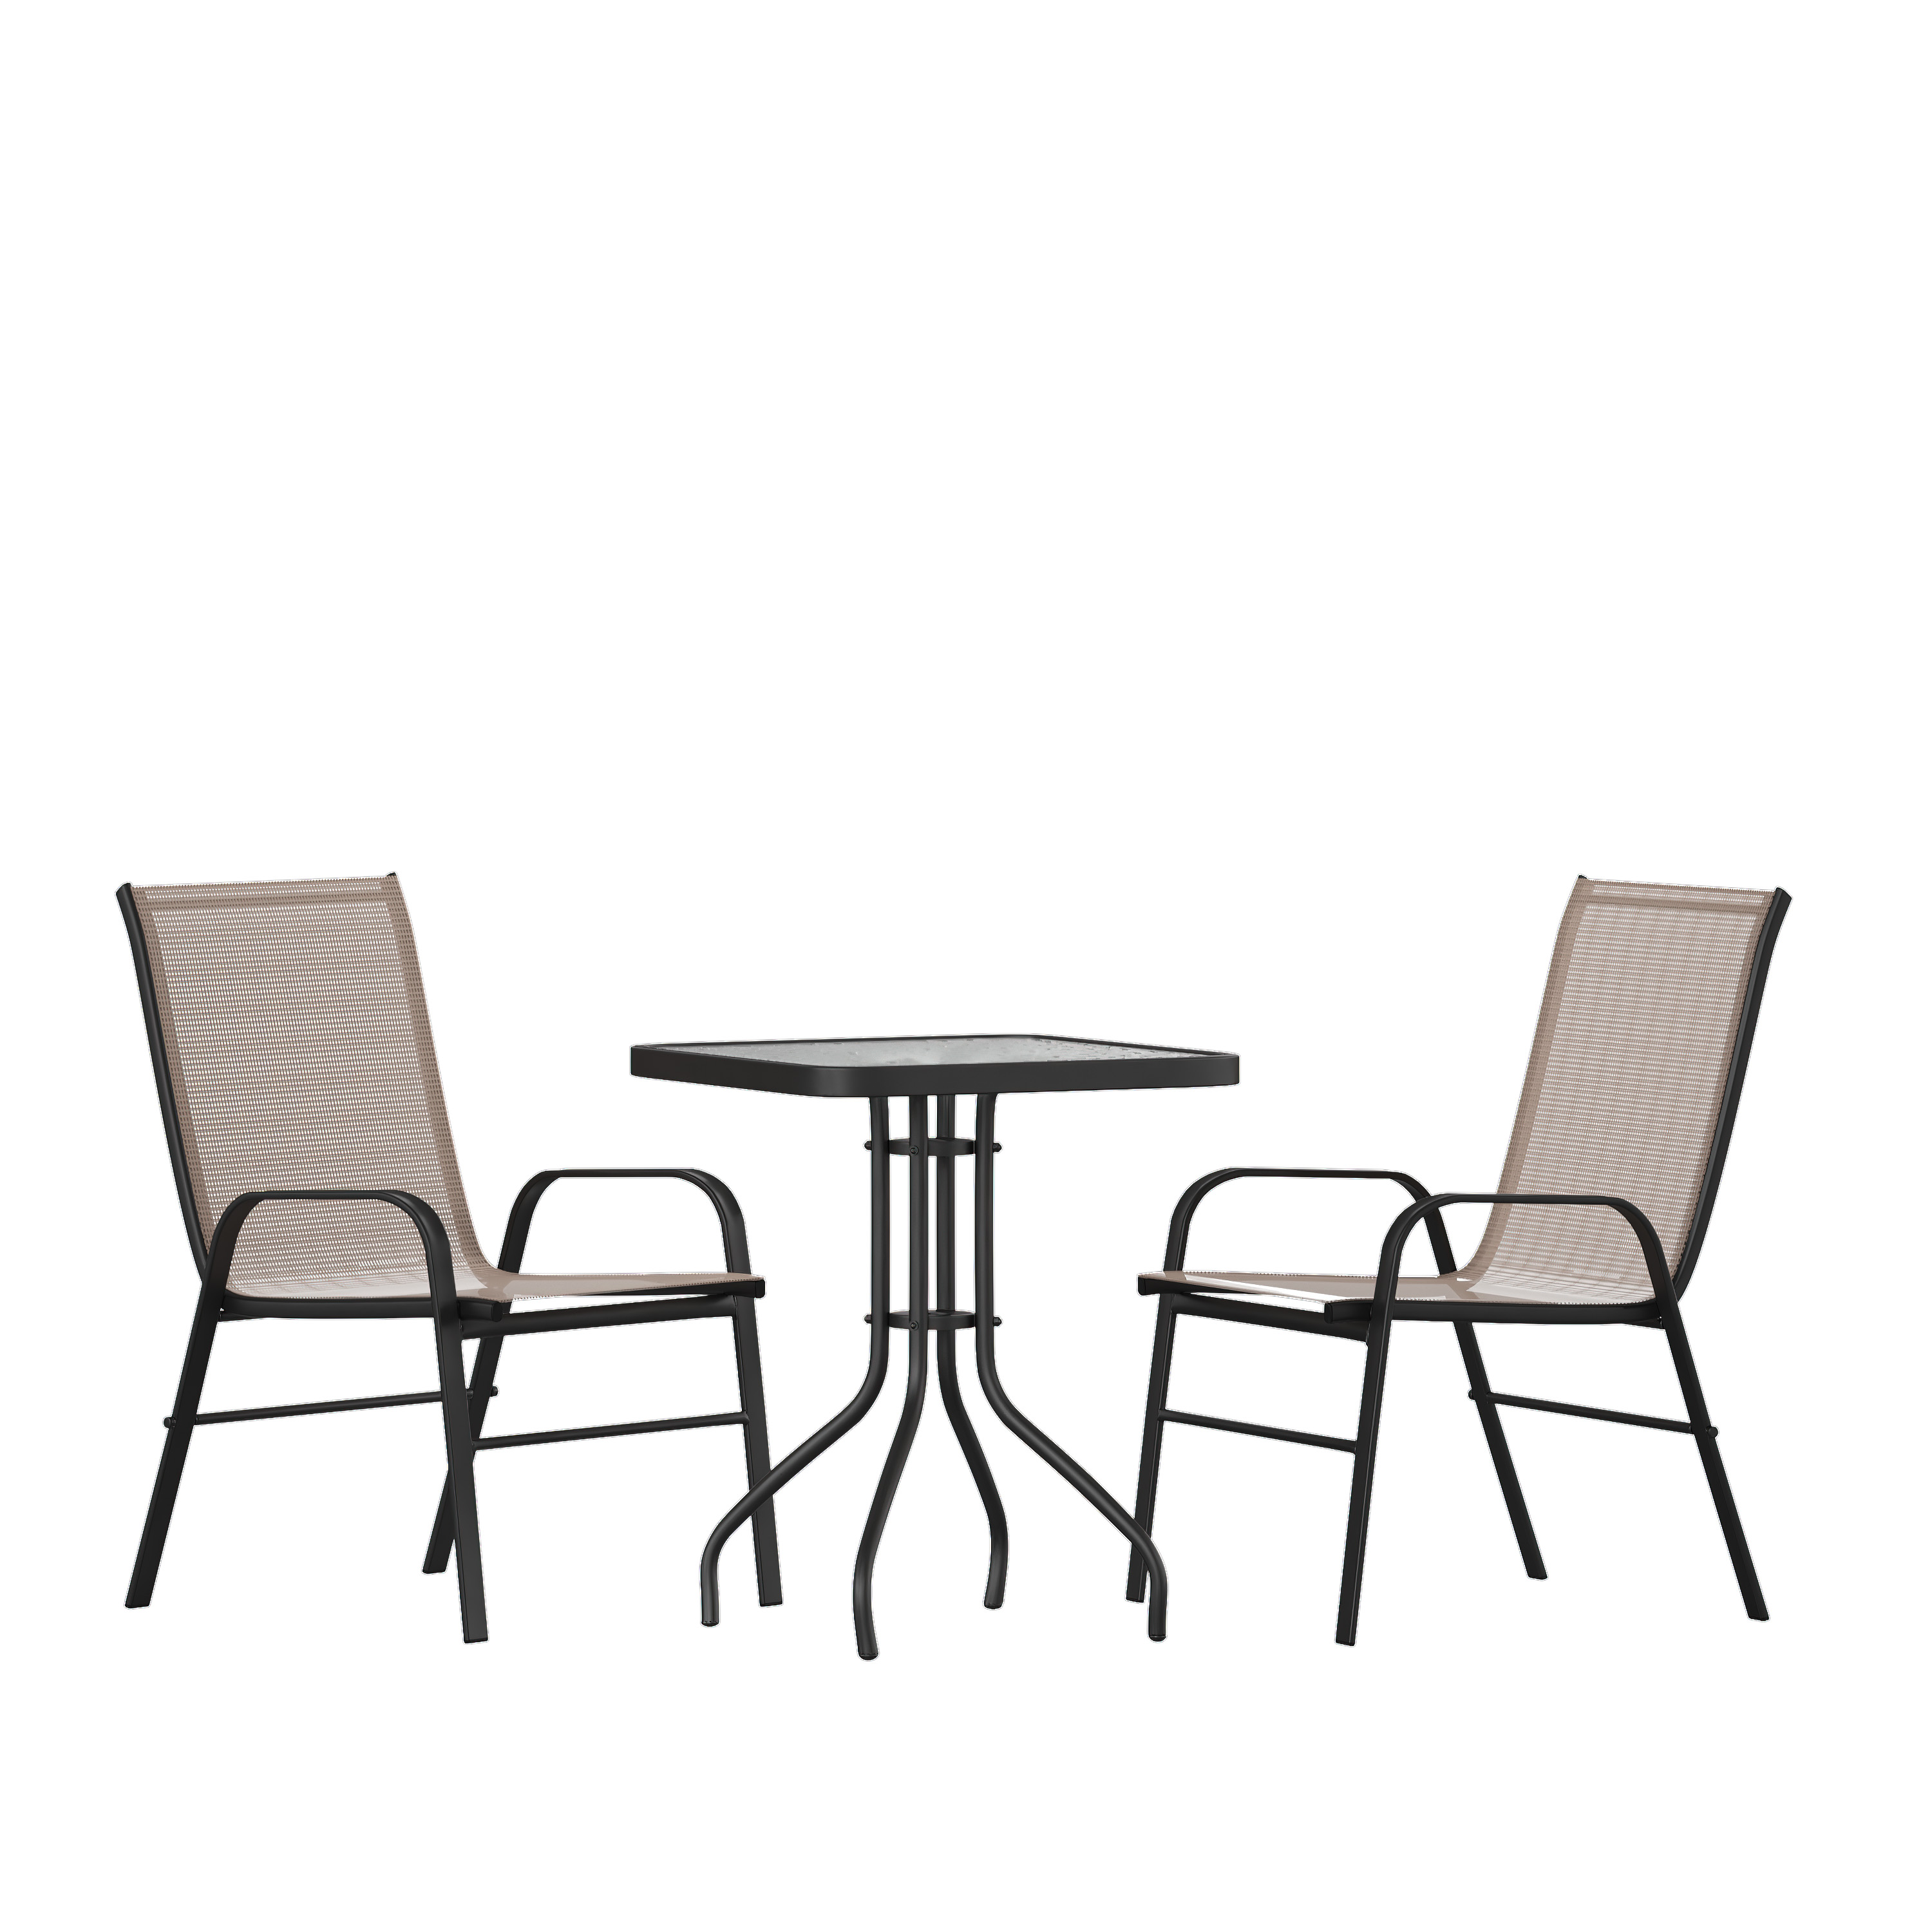 Flash Furniture Brazos Series 3-Piece Steel Glass Patio Table and Chair Set, Brown - image 1 of 11